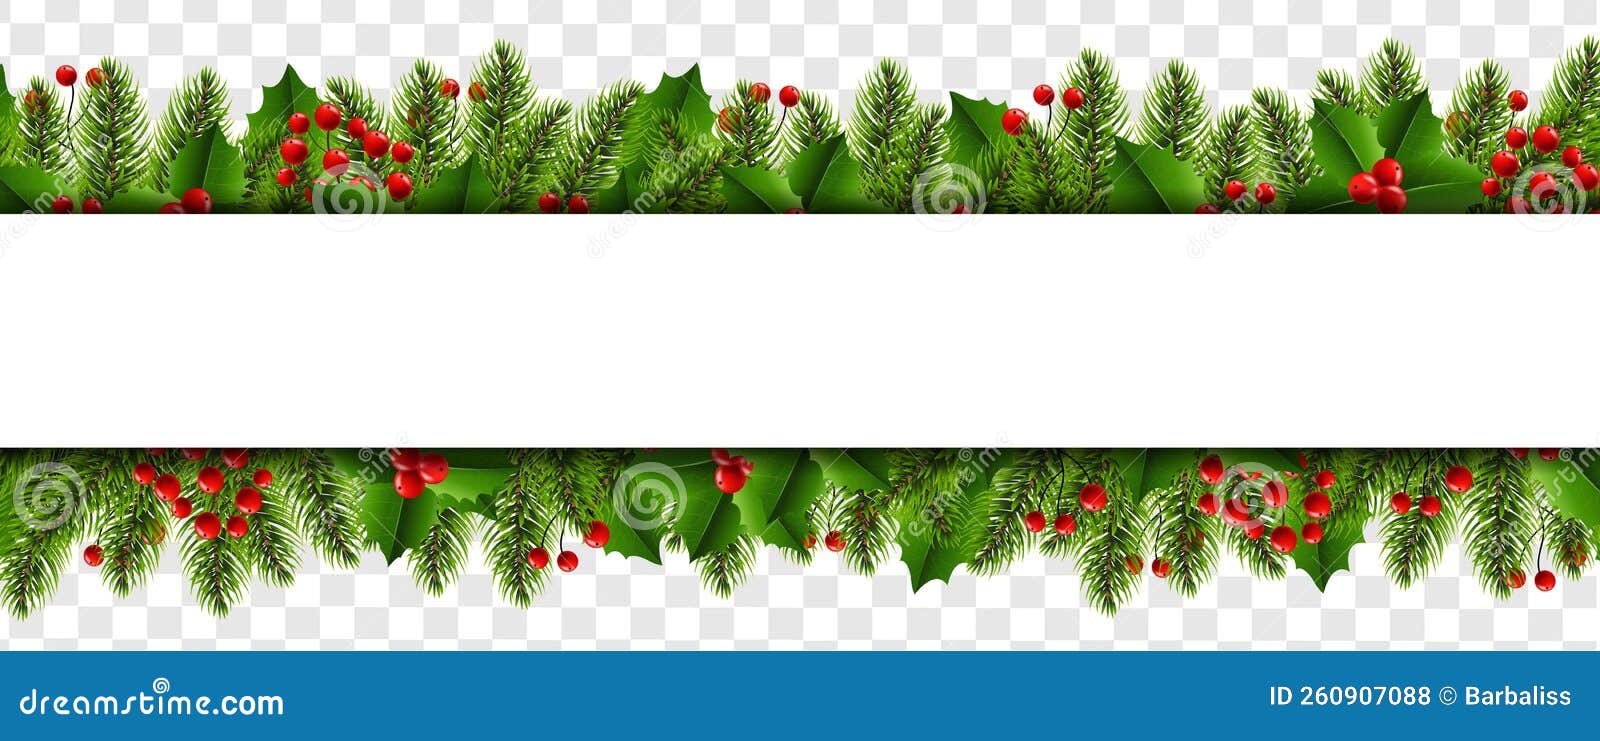 Border with Holly Berry Transparent Background Stock Vector ...